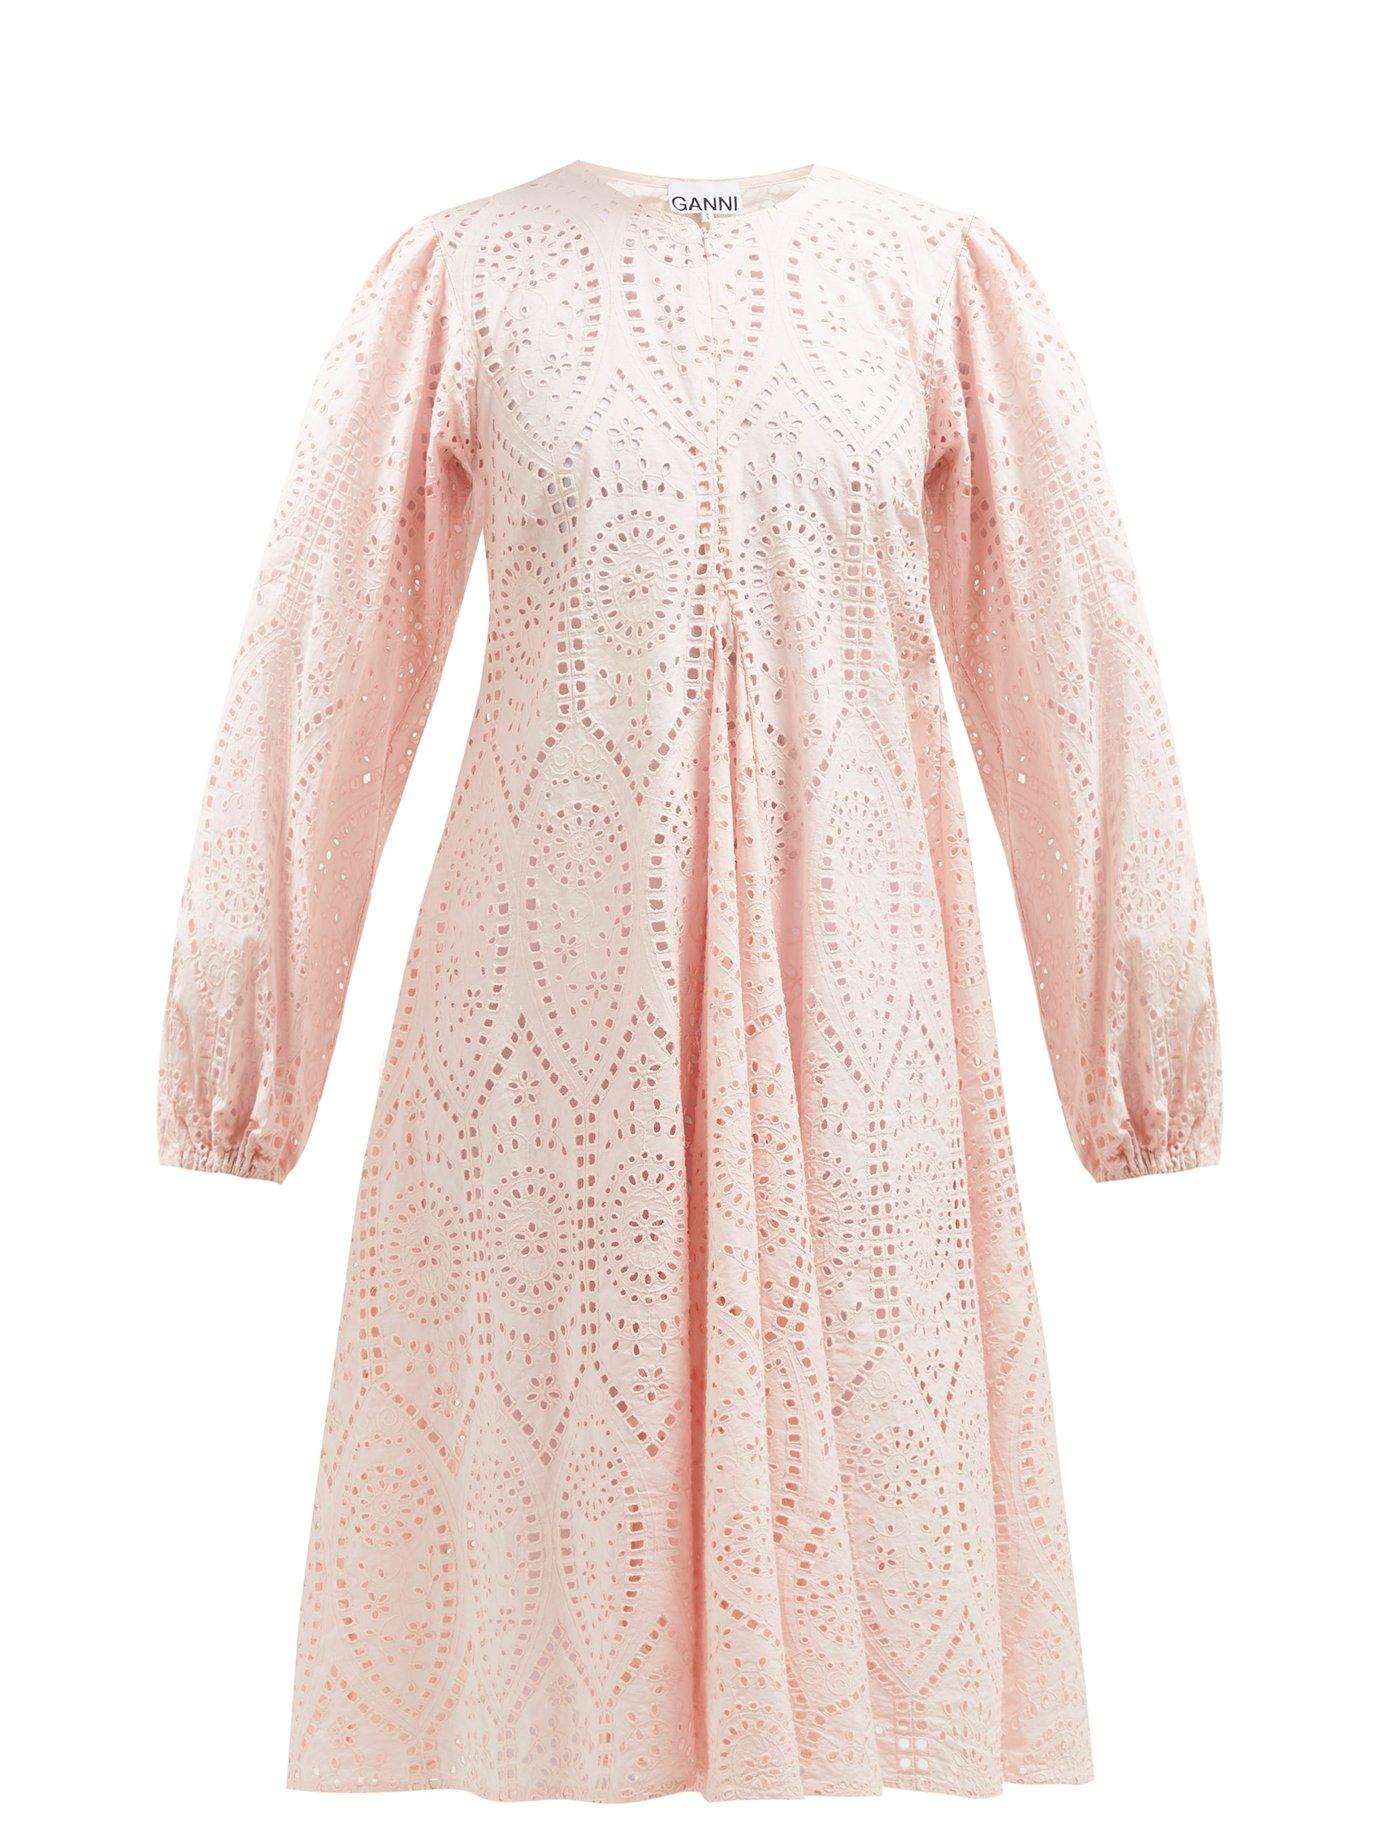 Ganni Cotton Sandrose Broderie Anglaise Midi Dress in Light Pink (Pink) -  Lyst